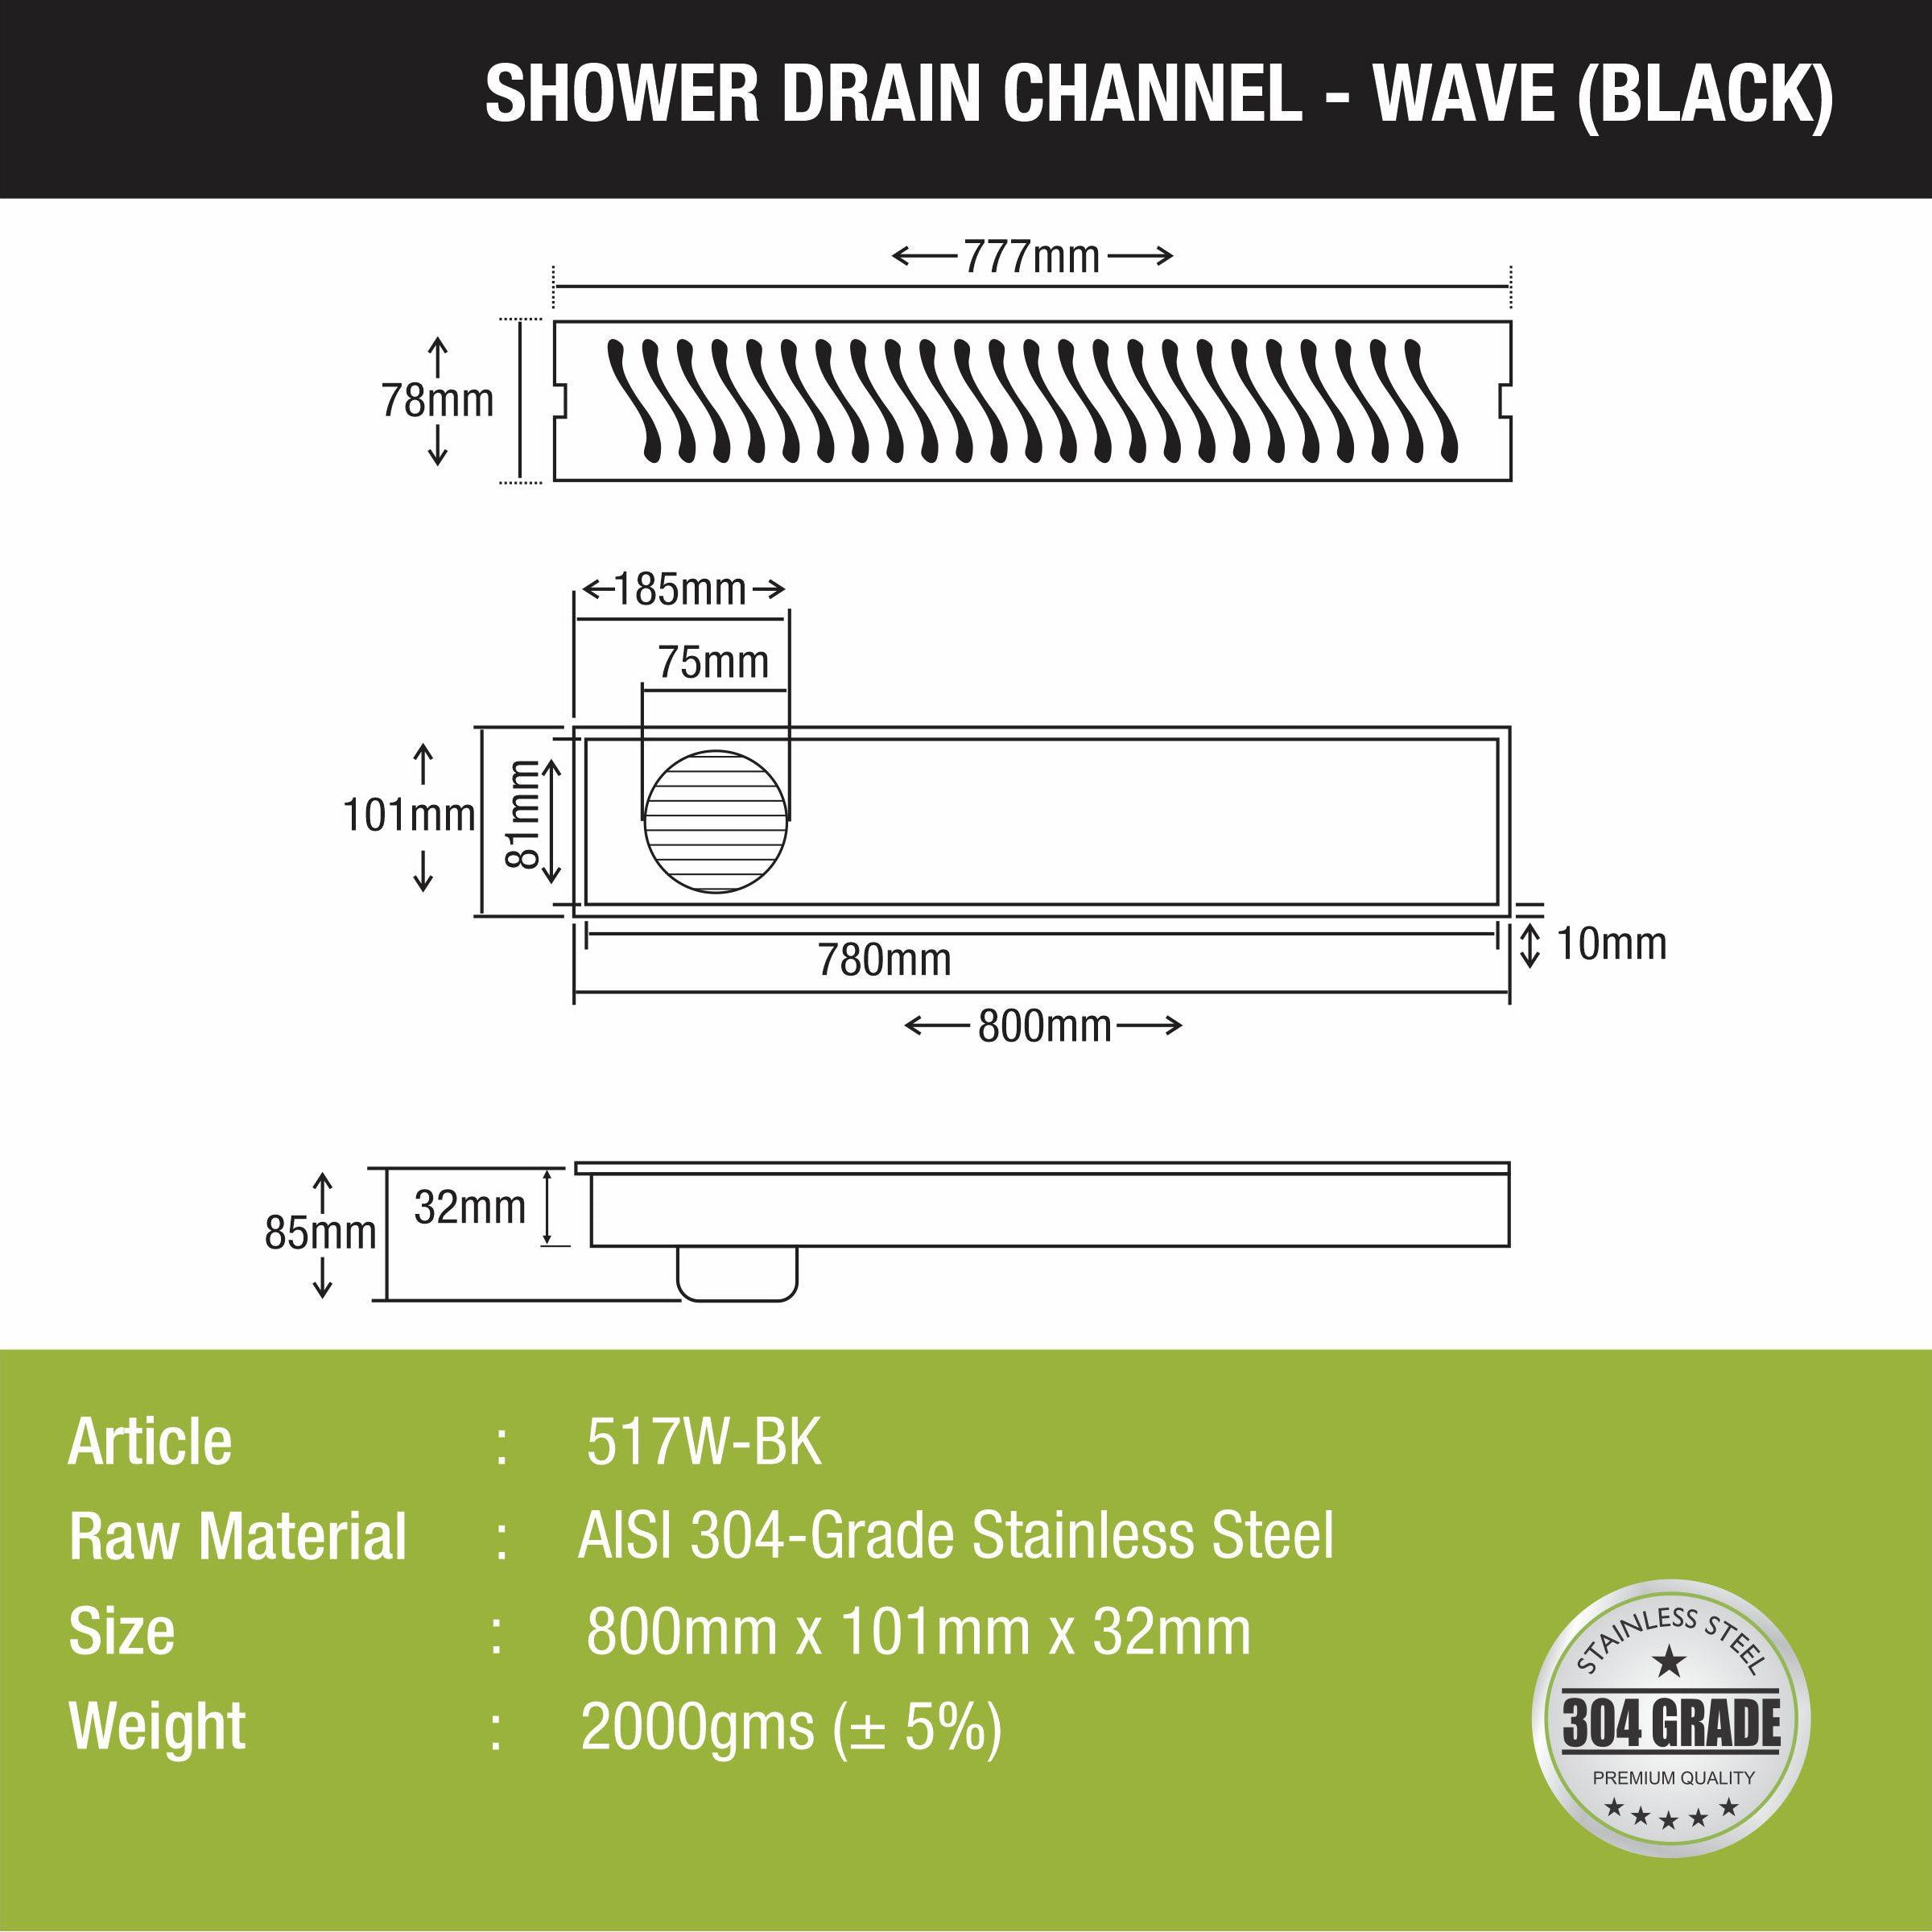 Wave Shower Drain Channel - Black (32 x 4 Inches) size and measurement